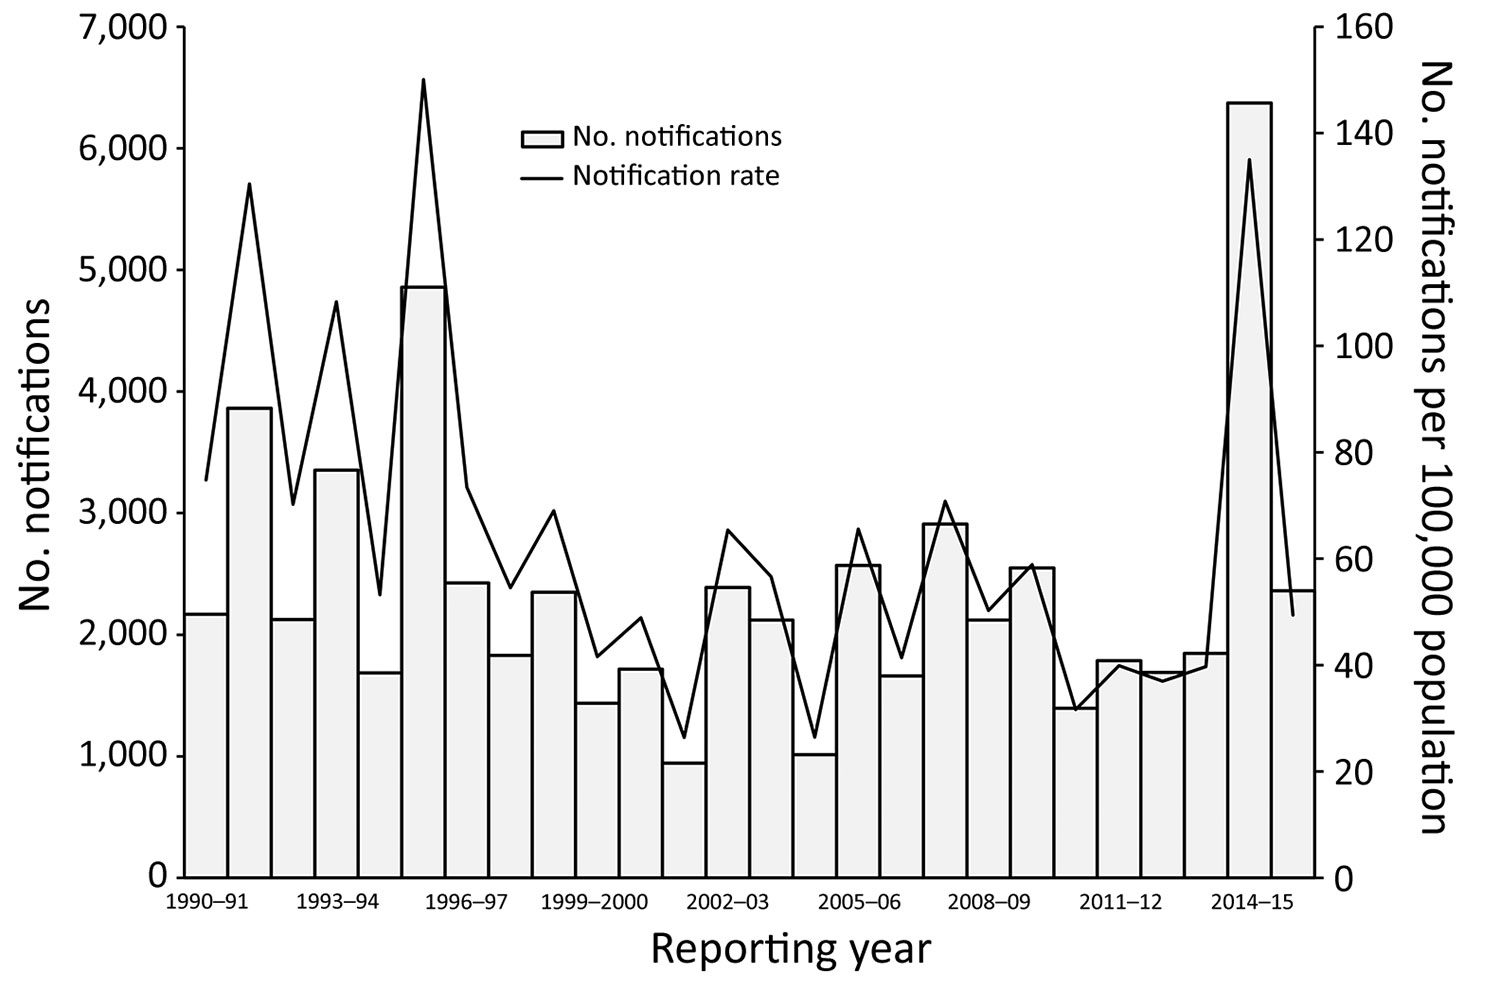 Number of notifications and notification rate of Ross River virus infections by reporting year, Queensland, Australia, 1990–2016. Reporting year is defined as July 1 of one year to June 30 of the next year.